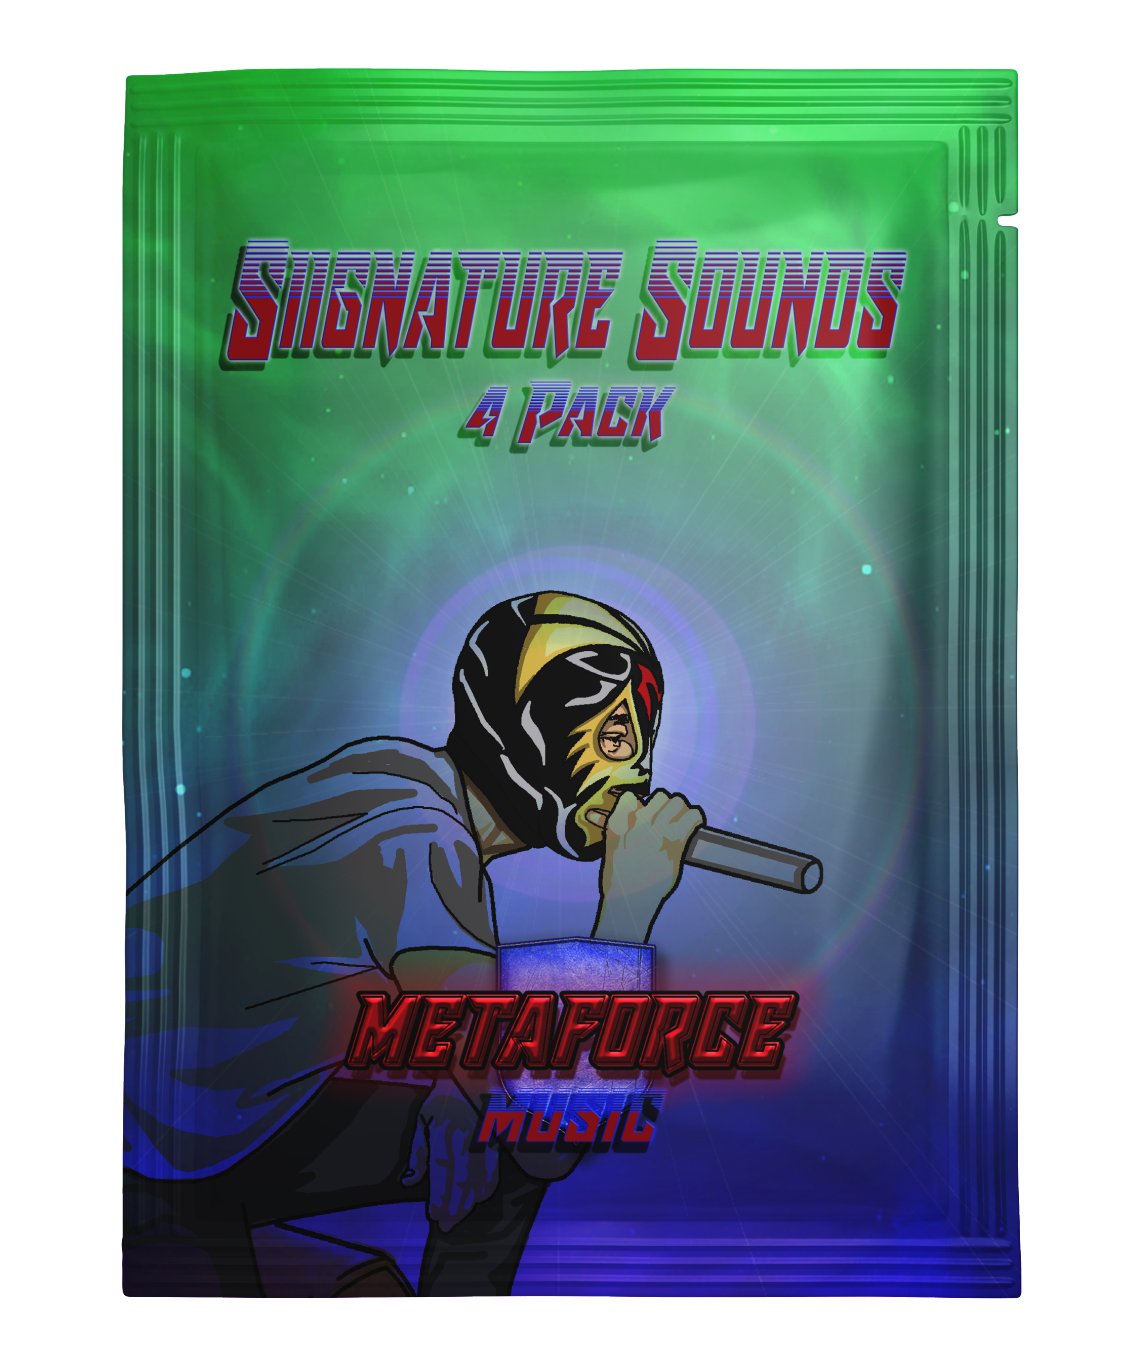 Signature Sounds Pack